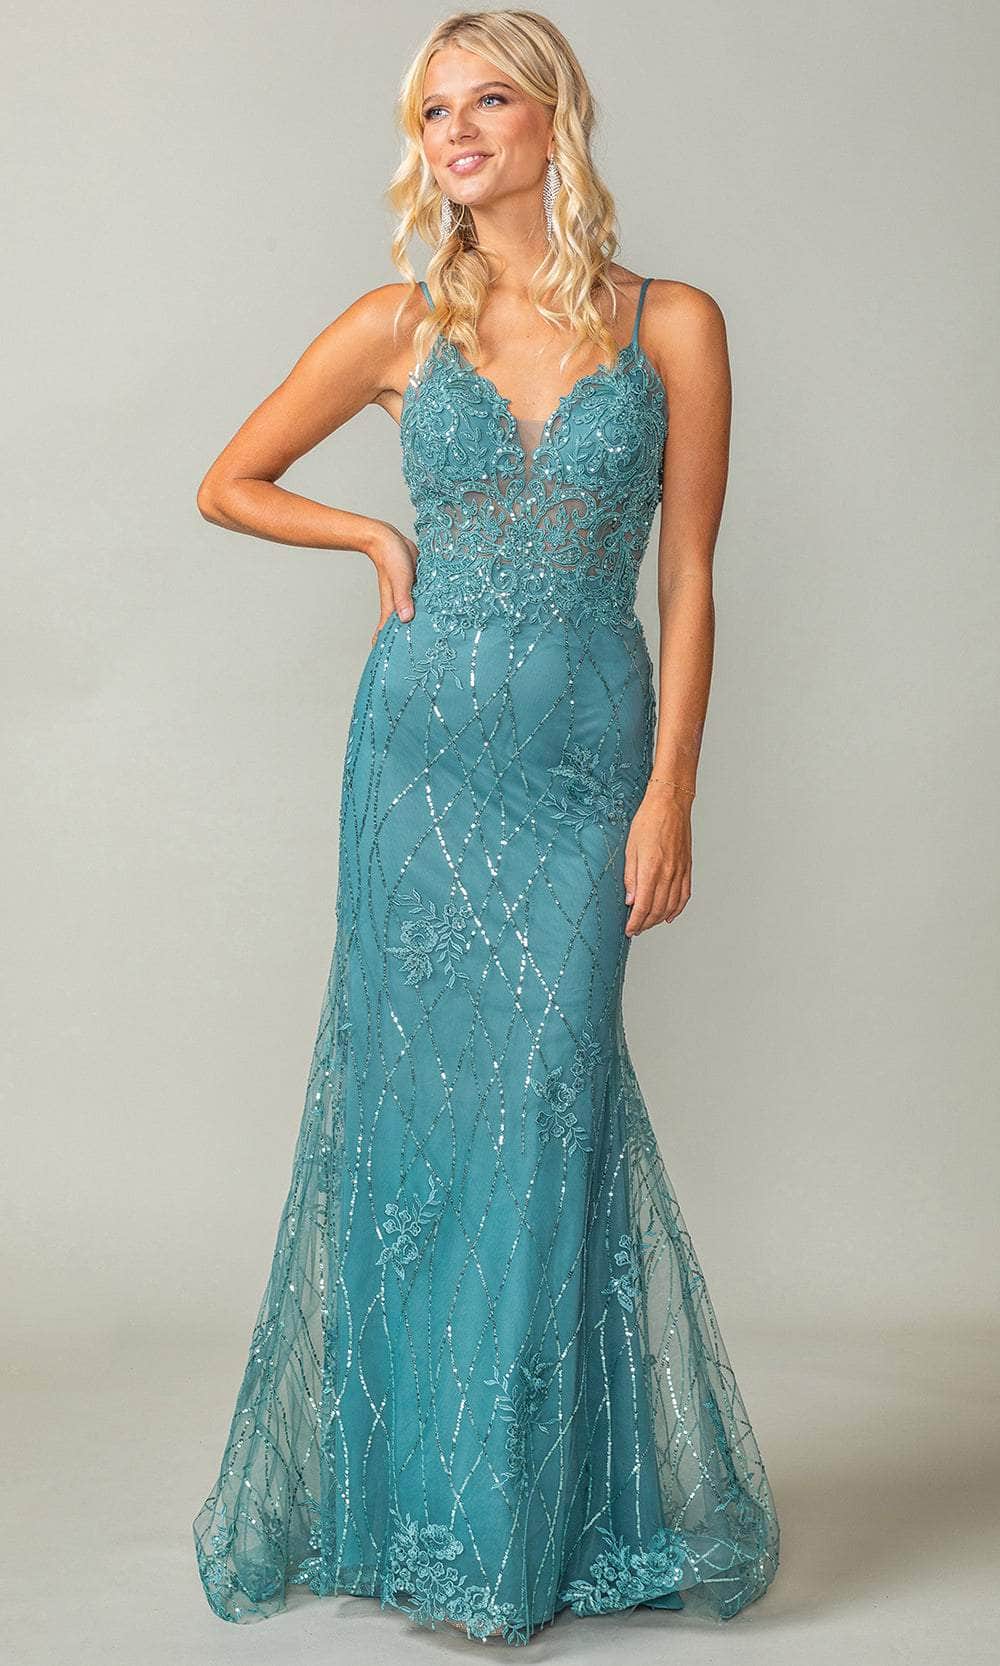 Dancing Queen 4371 - Lace Detail Mermaid Prom Dress Prom Dresses 